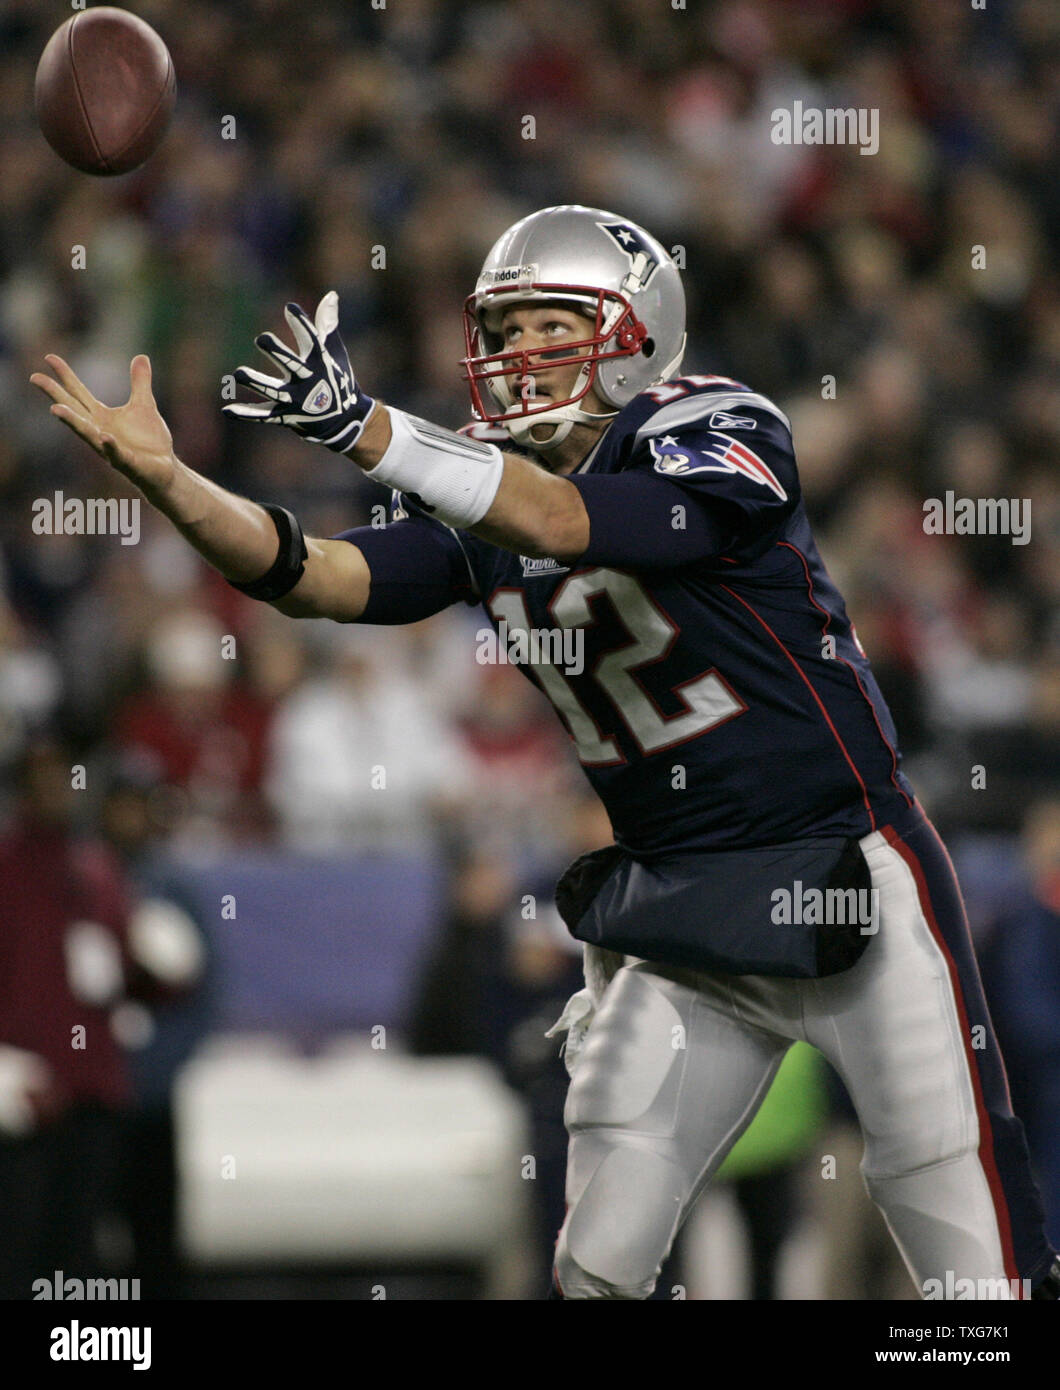 New England Patriots quarterback Tom Brady chases after a bad snap in the second quarter against the New York Giants at Gillette Stadium in Foxboro, Massachusetts on November 6, 2011.  The Giants defeated the Patriots 24-20.   UPI/Matthew Healey Stock Photo